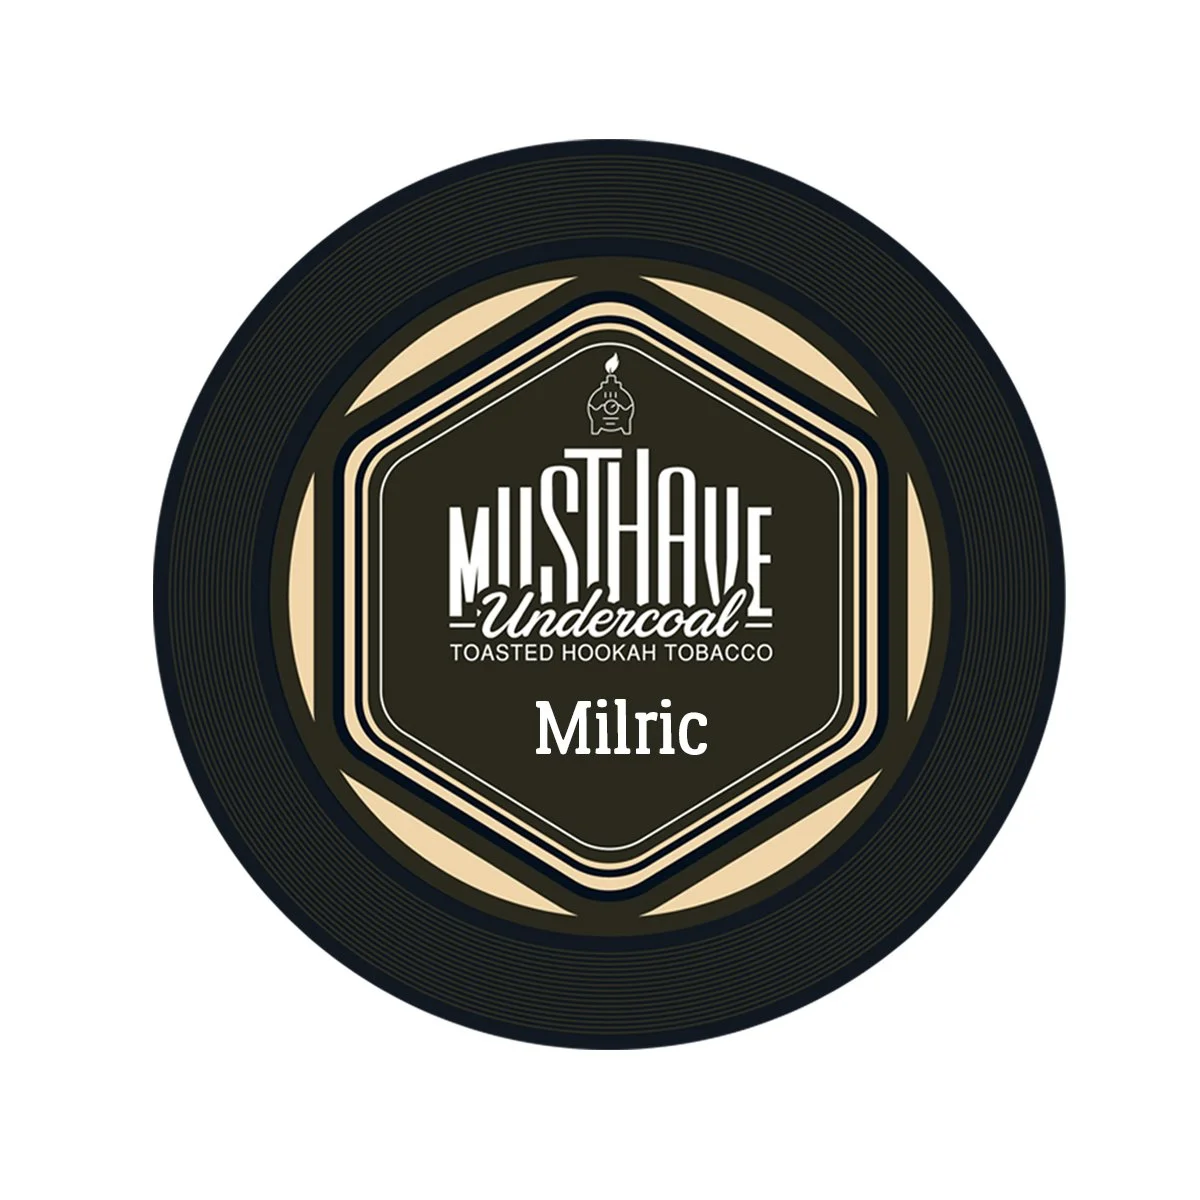 Musthave | Milric | 25g 